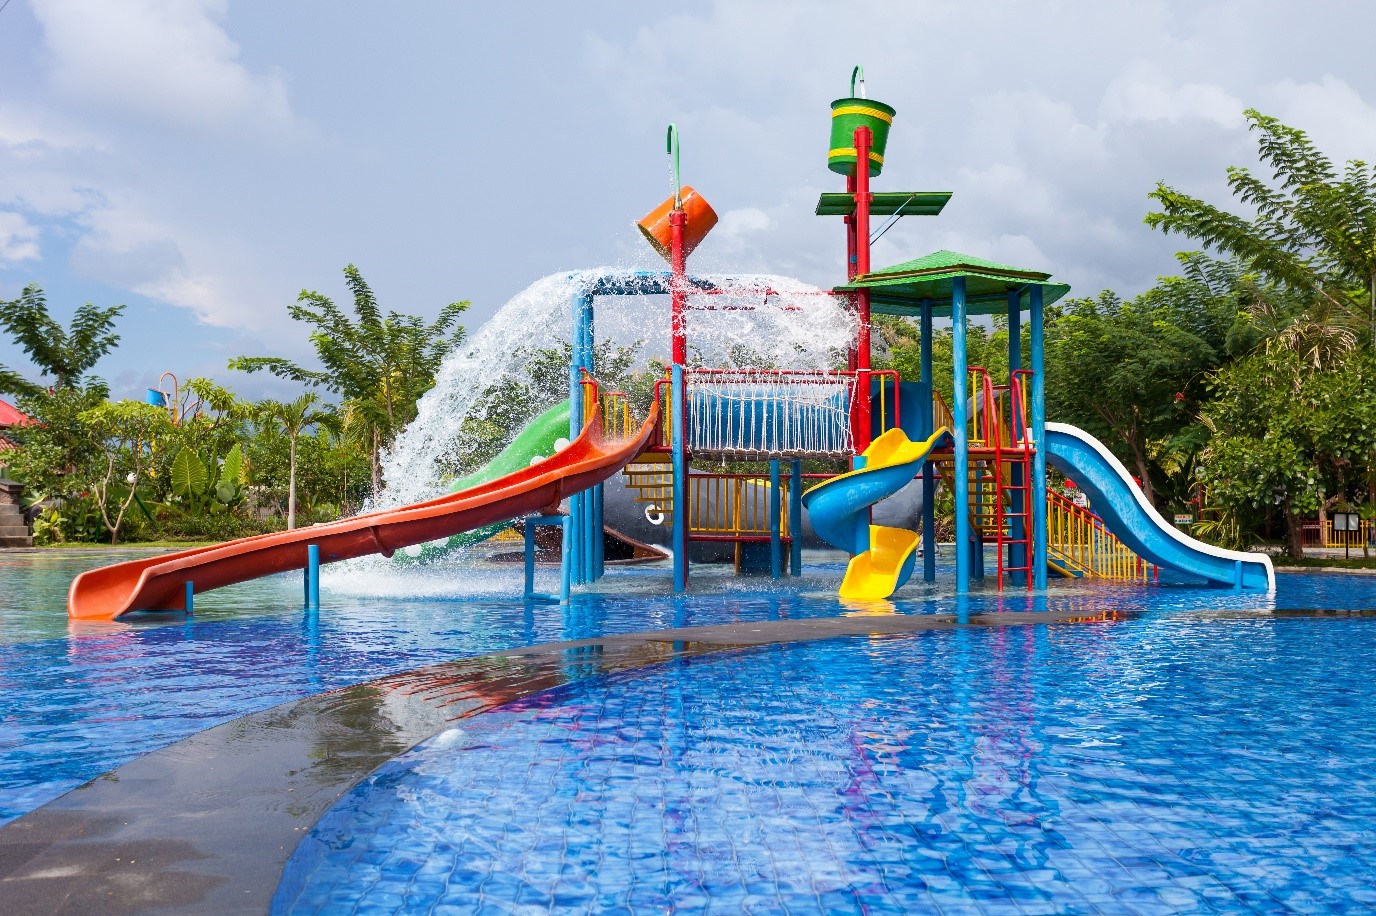 The Effect of Experience Quality on Perceived Value, Satisfaction, Image and Behavioral Intention of Water Park Patrons: New versus Repeat Visitors